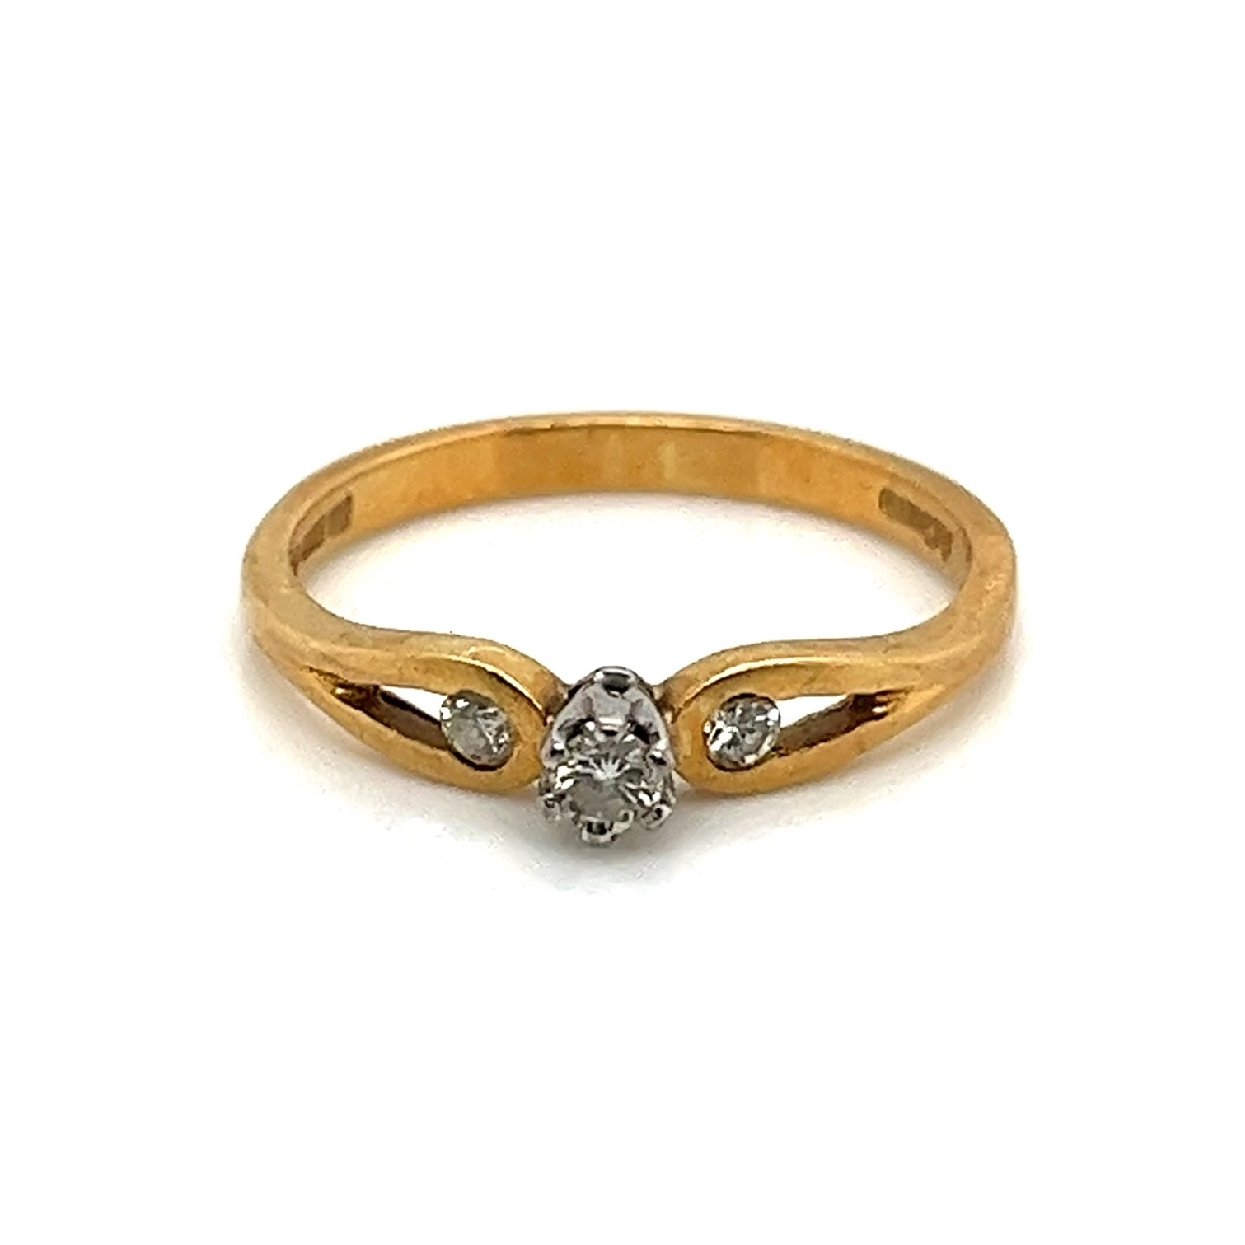 18K Yellow Gold and White Gold Round Diamond Ring with Diamond Accents

Size 6